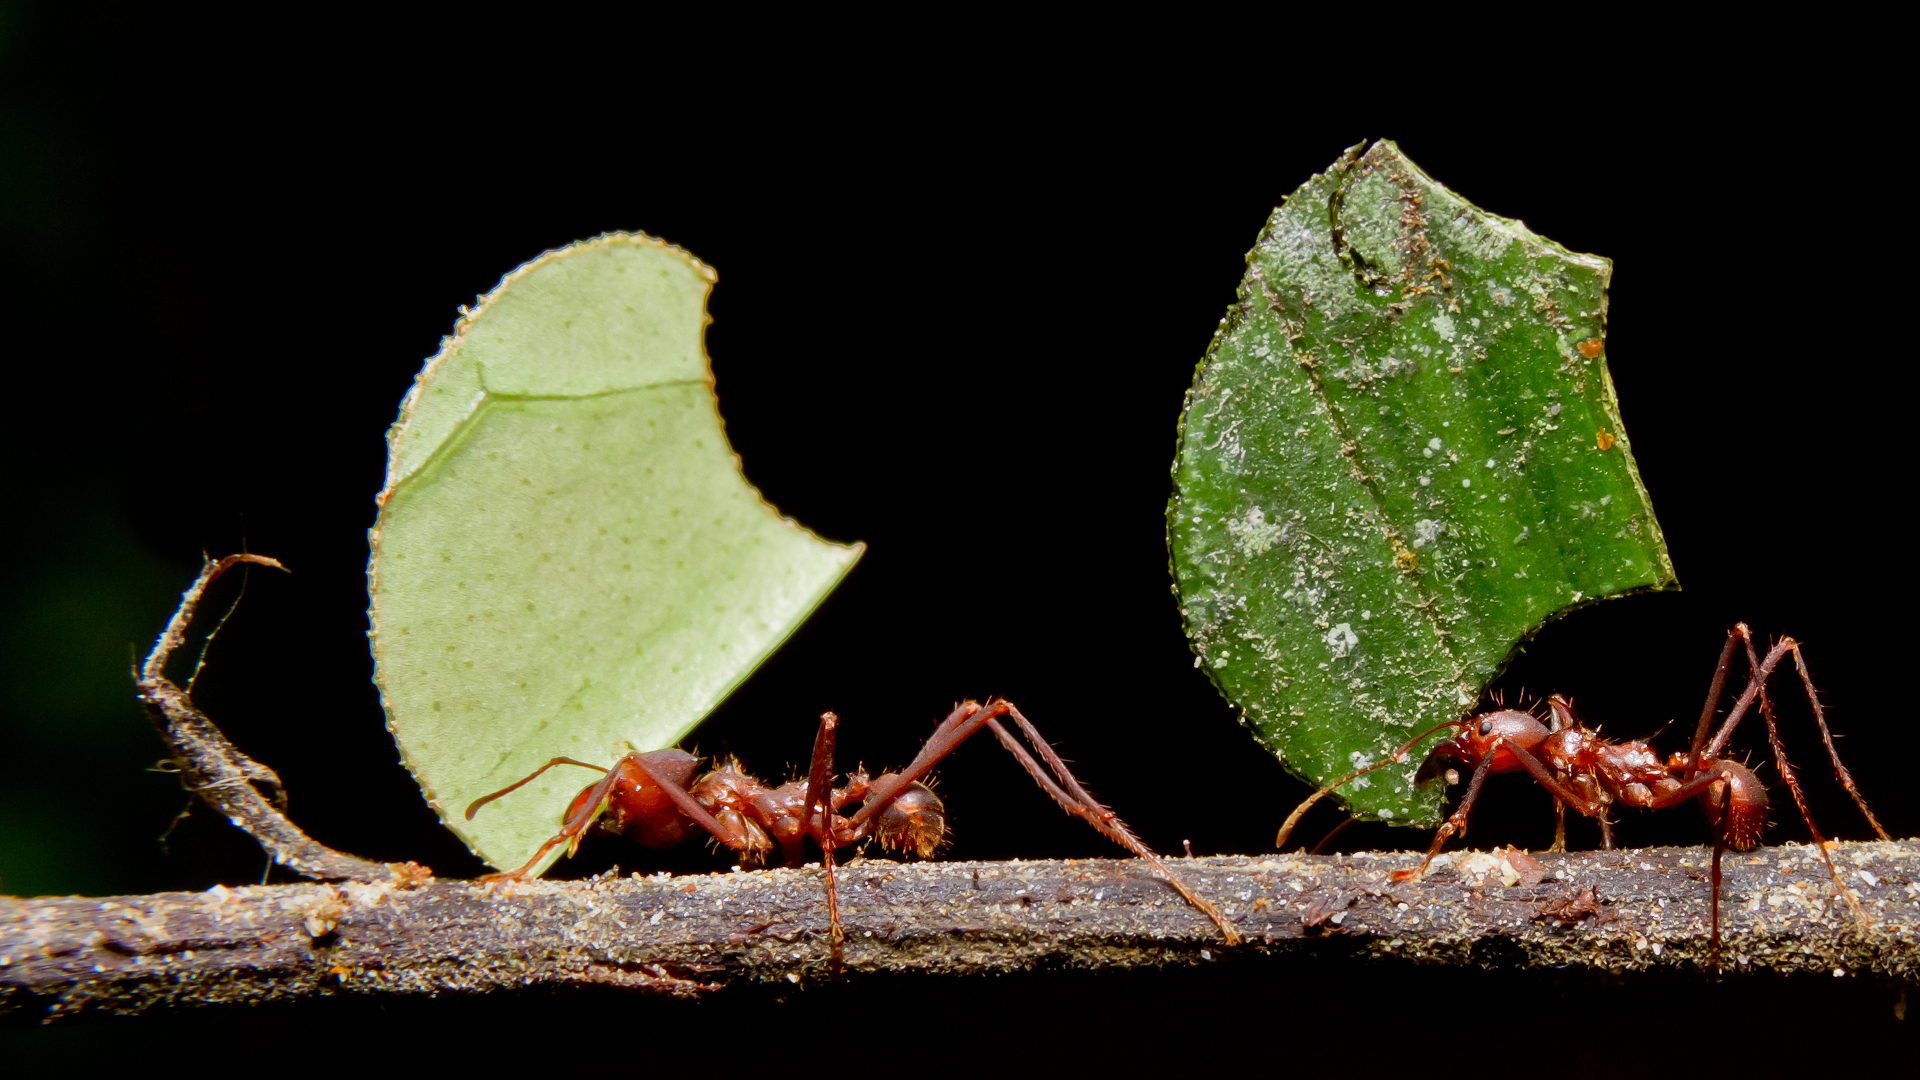 Where Are the Ants Carrying All Those Leaves? Deep Look